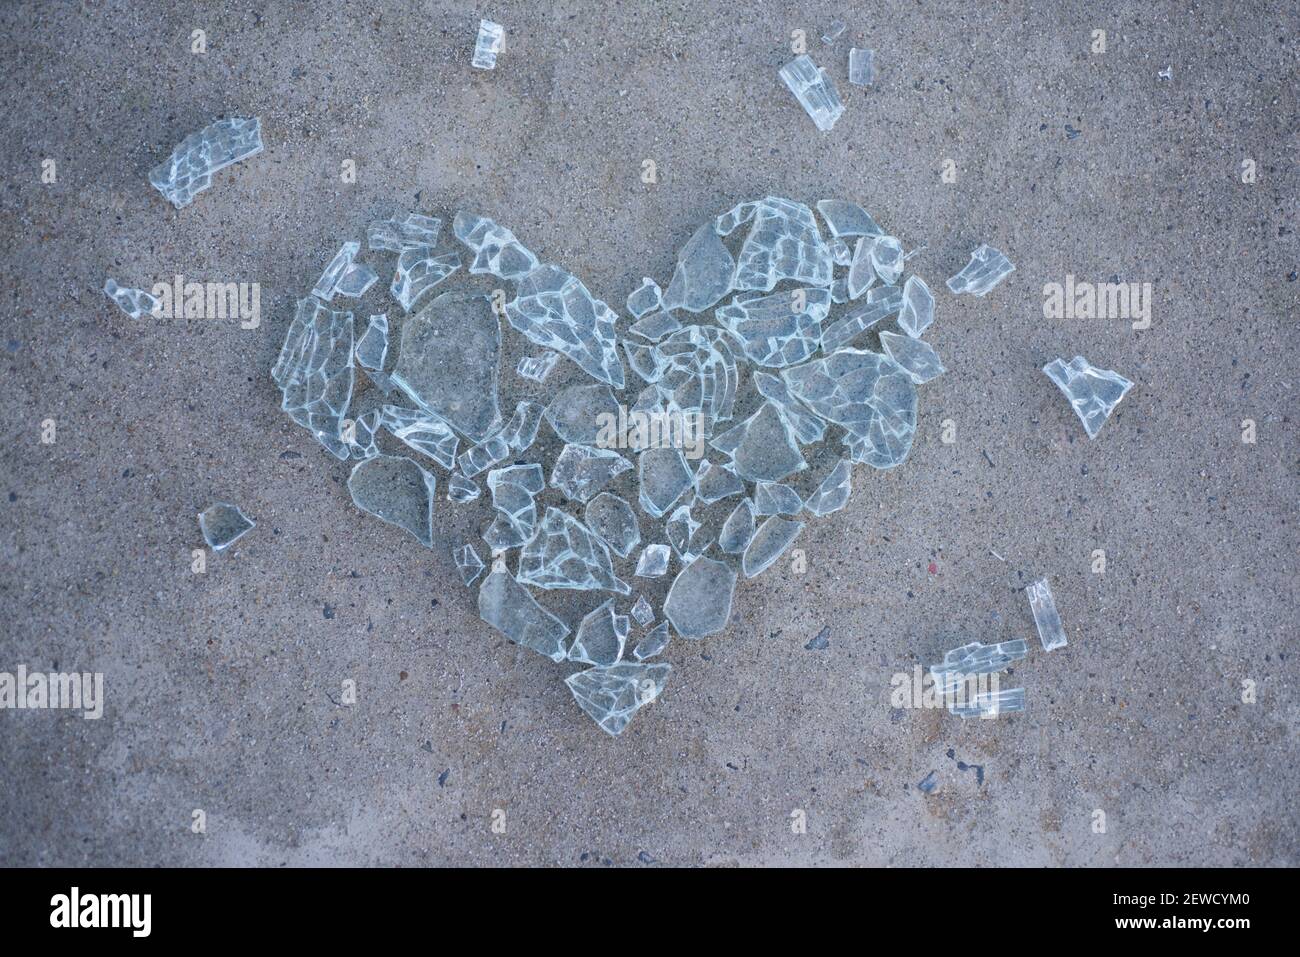 Broken love. Bad relationships. Heart made from glass. Heart-shape. Heart logo. Broken ice heart. Stock Photo